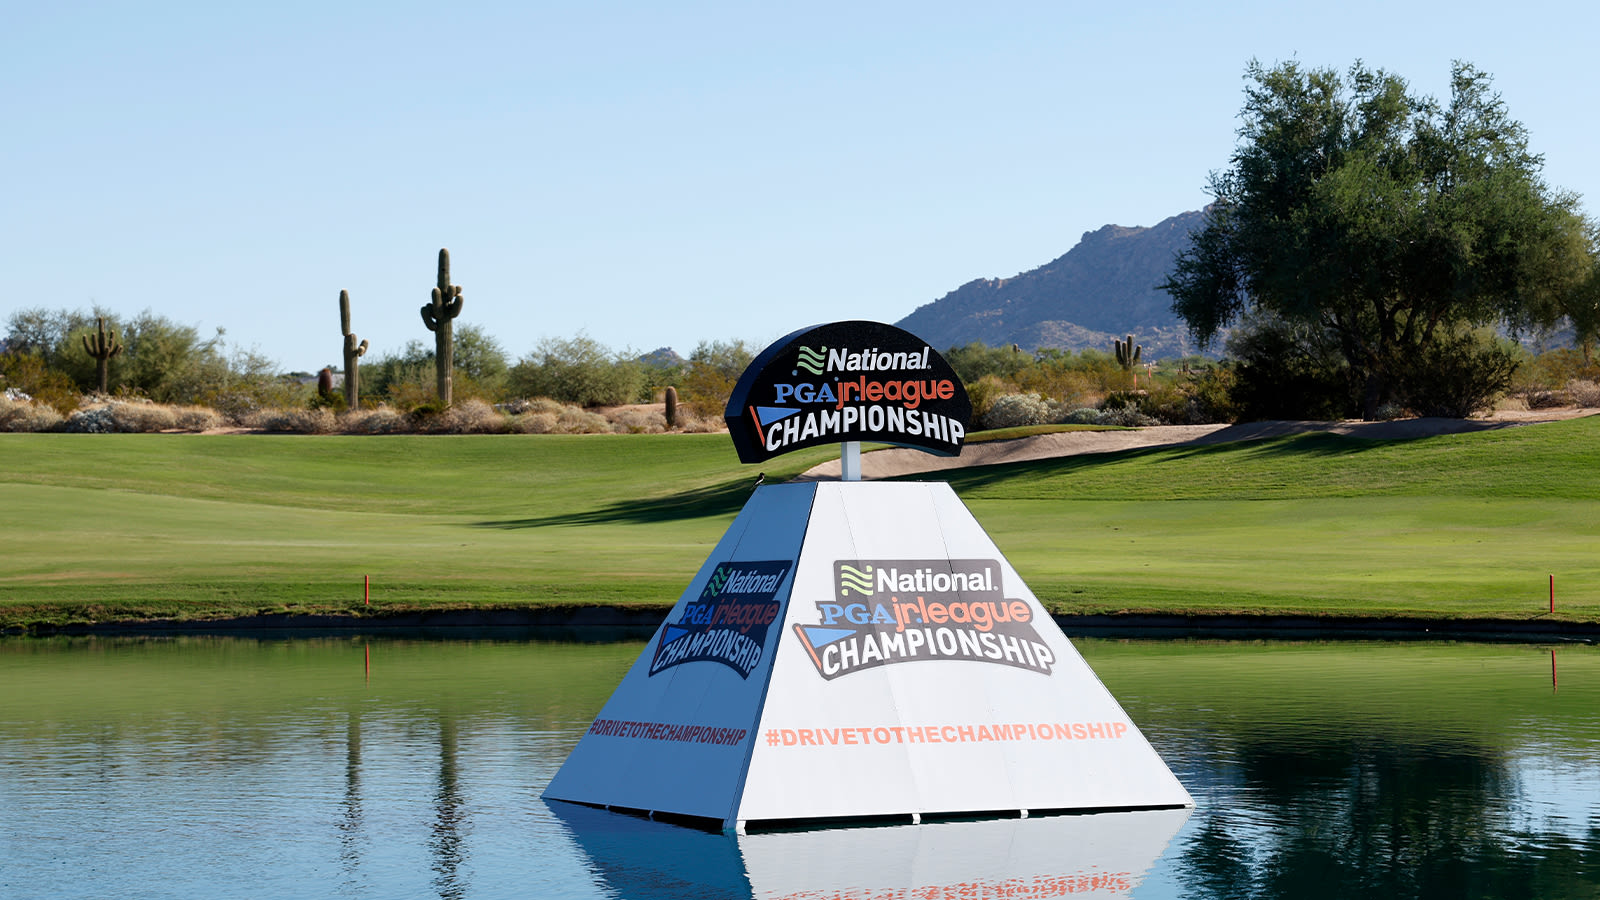 A detail view of signage during a practice round of the 2022 National Car Rental PGA Jr. League Championship at Grayhawk Golf Club on October 5, 2022 in Scottsdale, Arizona. (Photo by Chris Coduto/PGA of America)